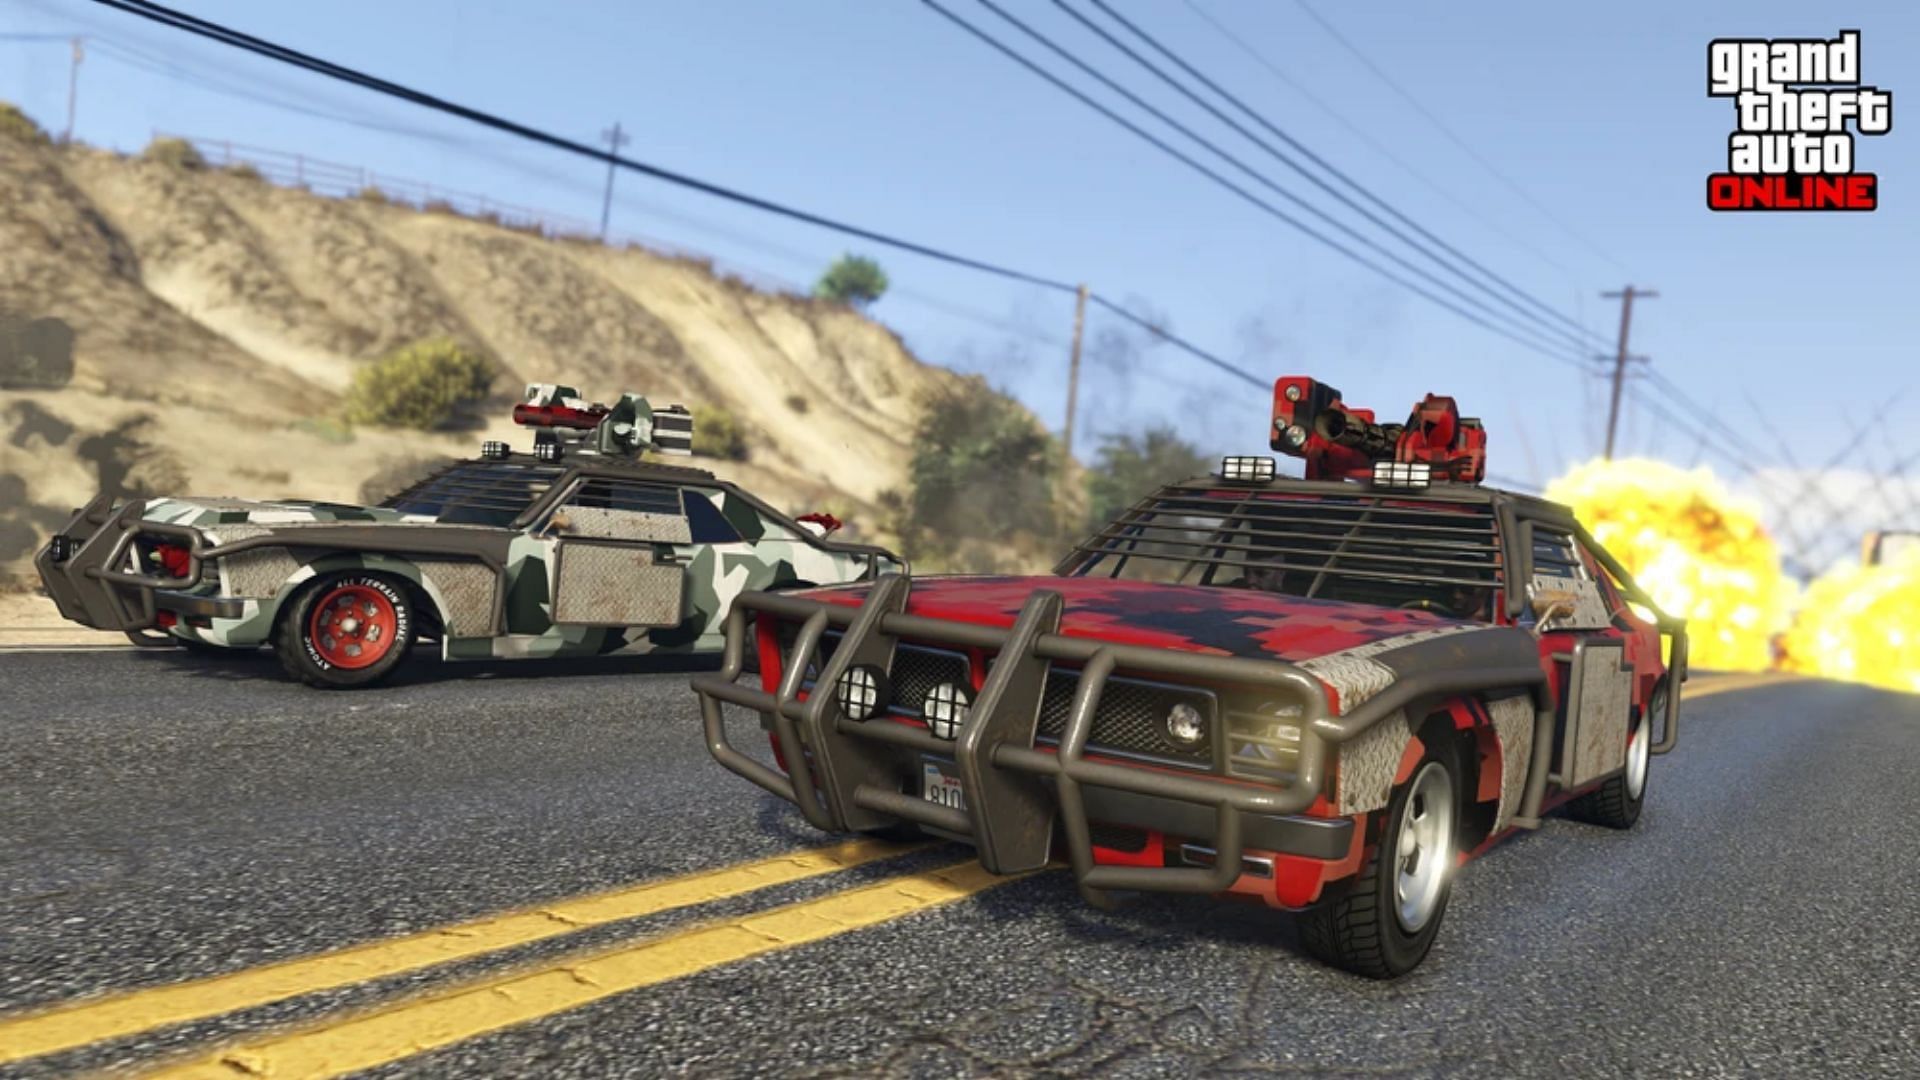 Two fully upgraded Weaponized Tampas in Grand Theft Auto Online (Image via Rockstar Games)